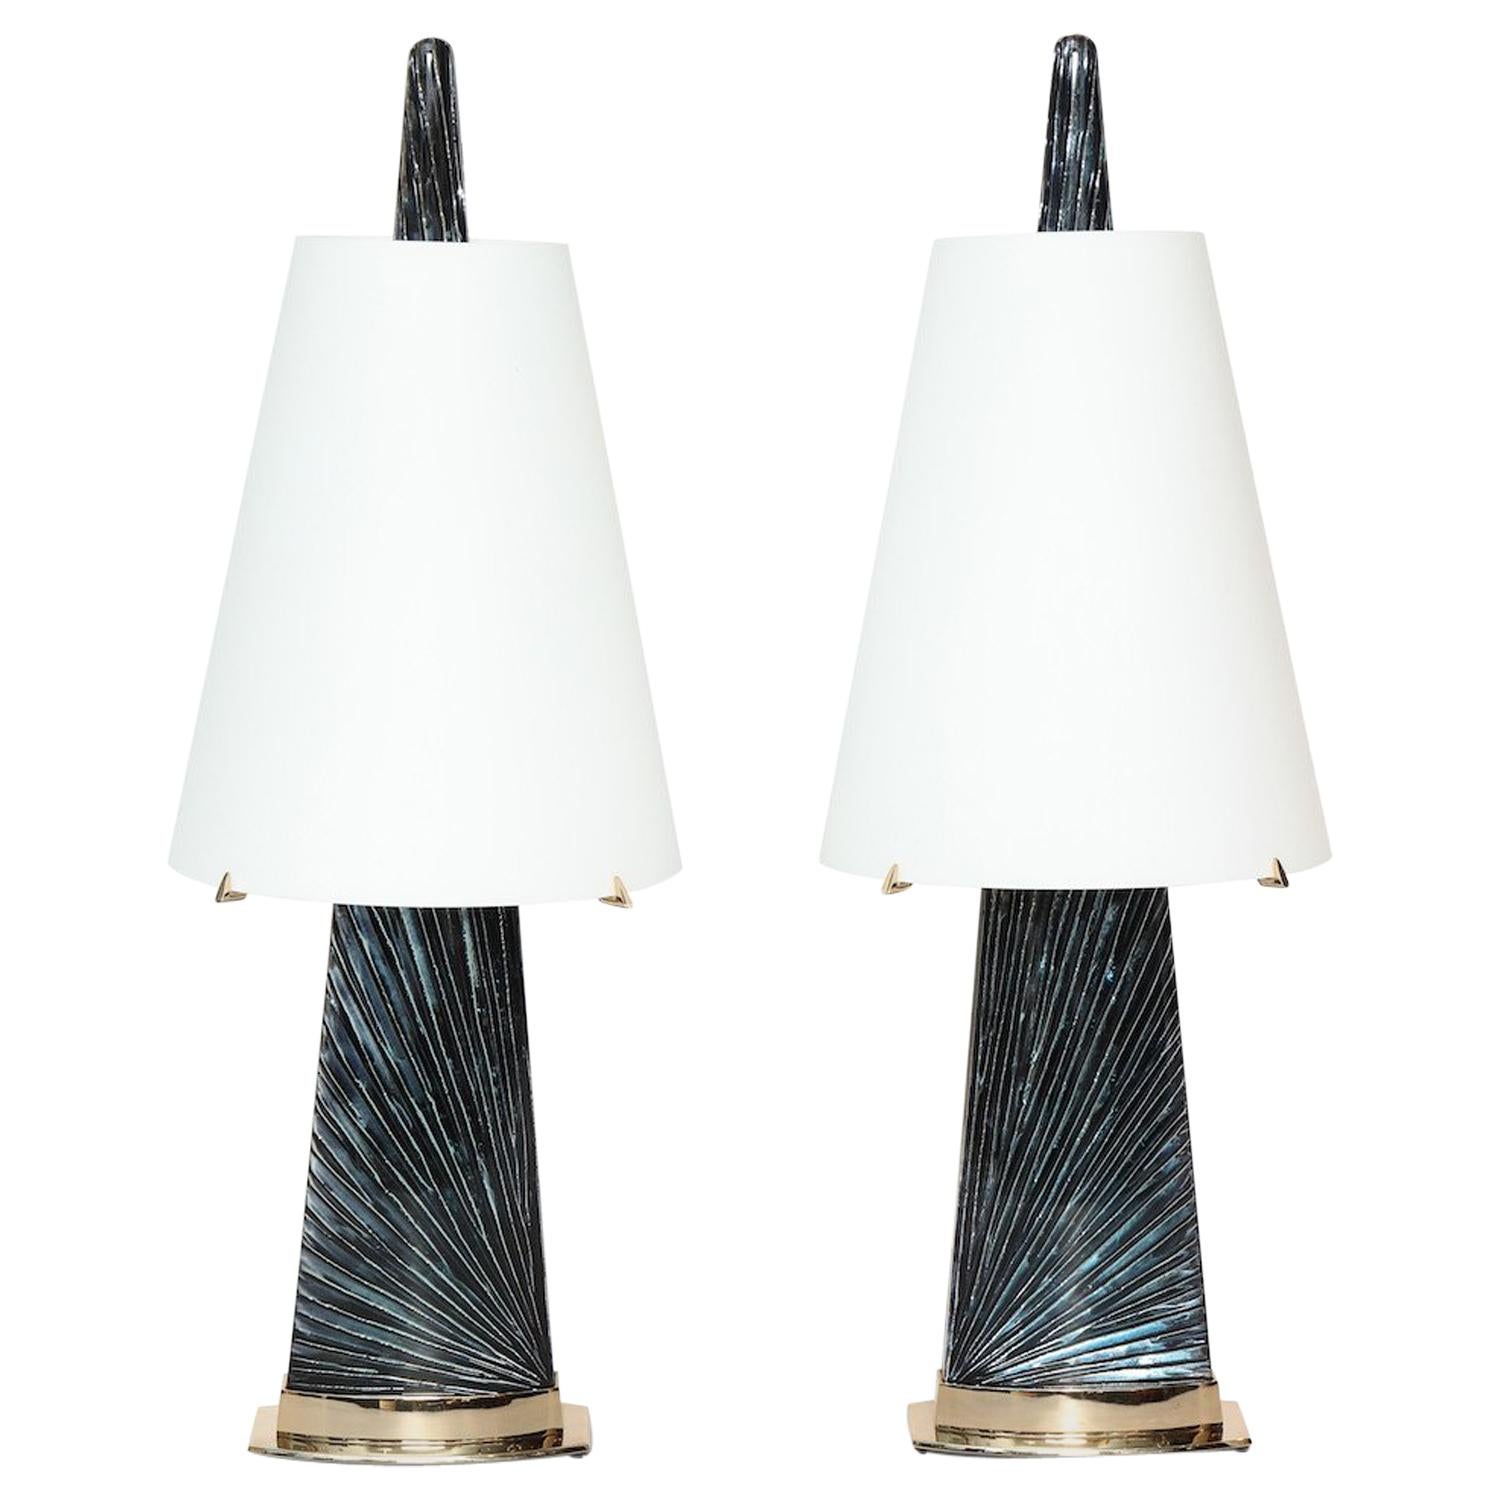 Studio-Made "Abisso" Table Lamps by Ghiró Studio